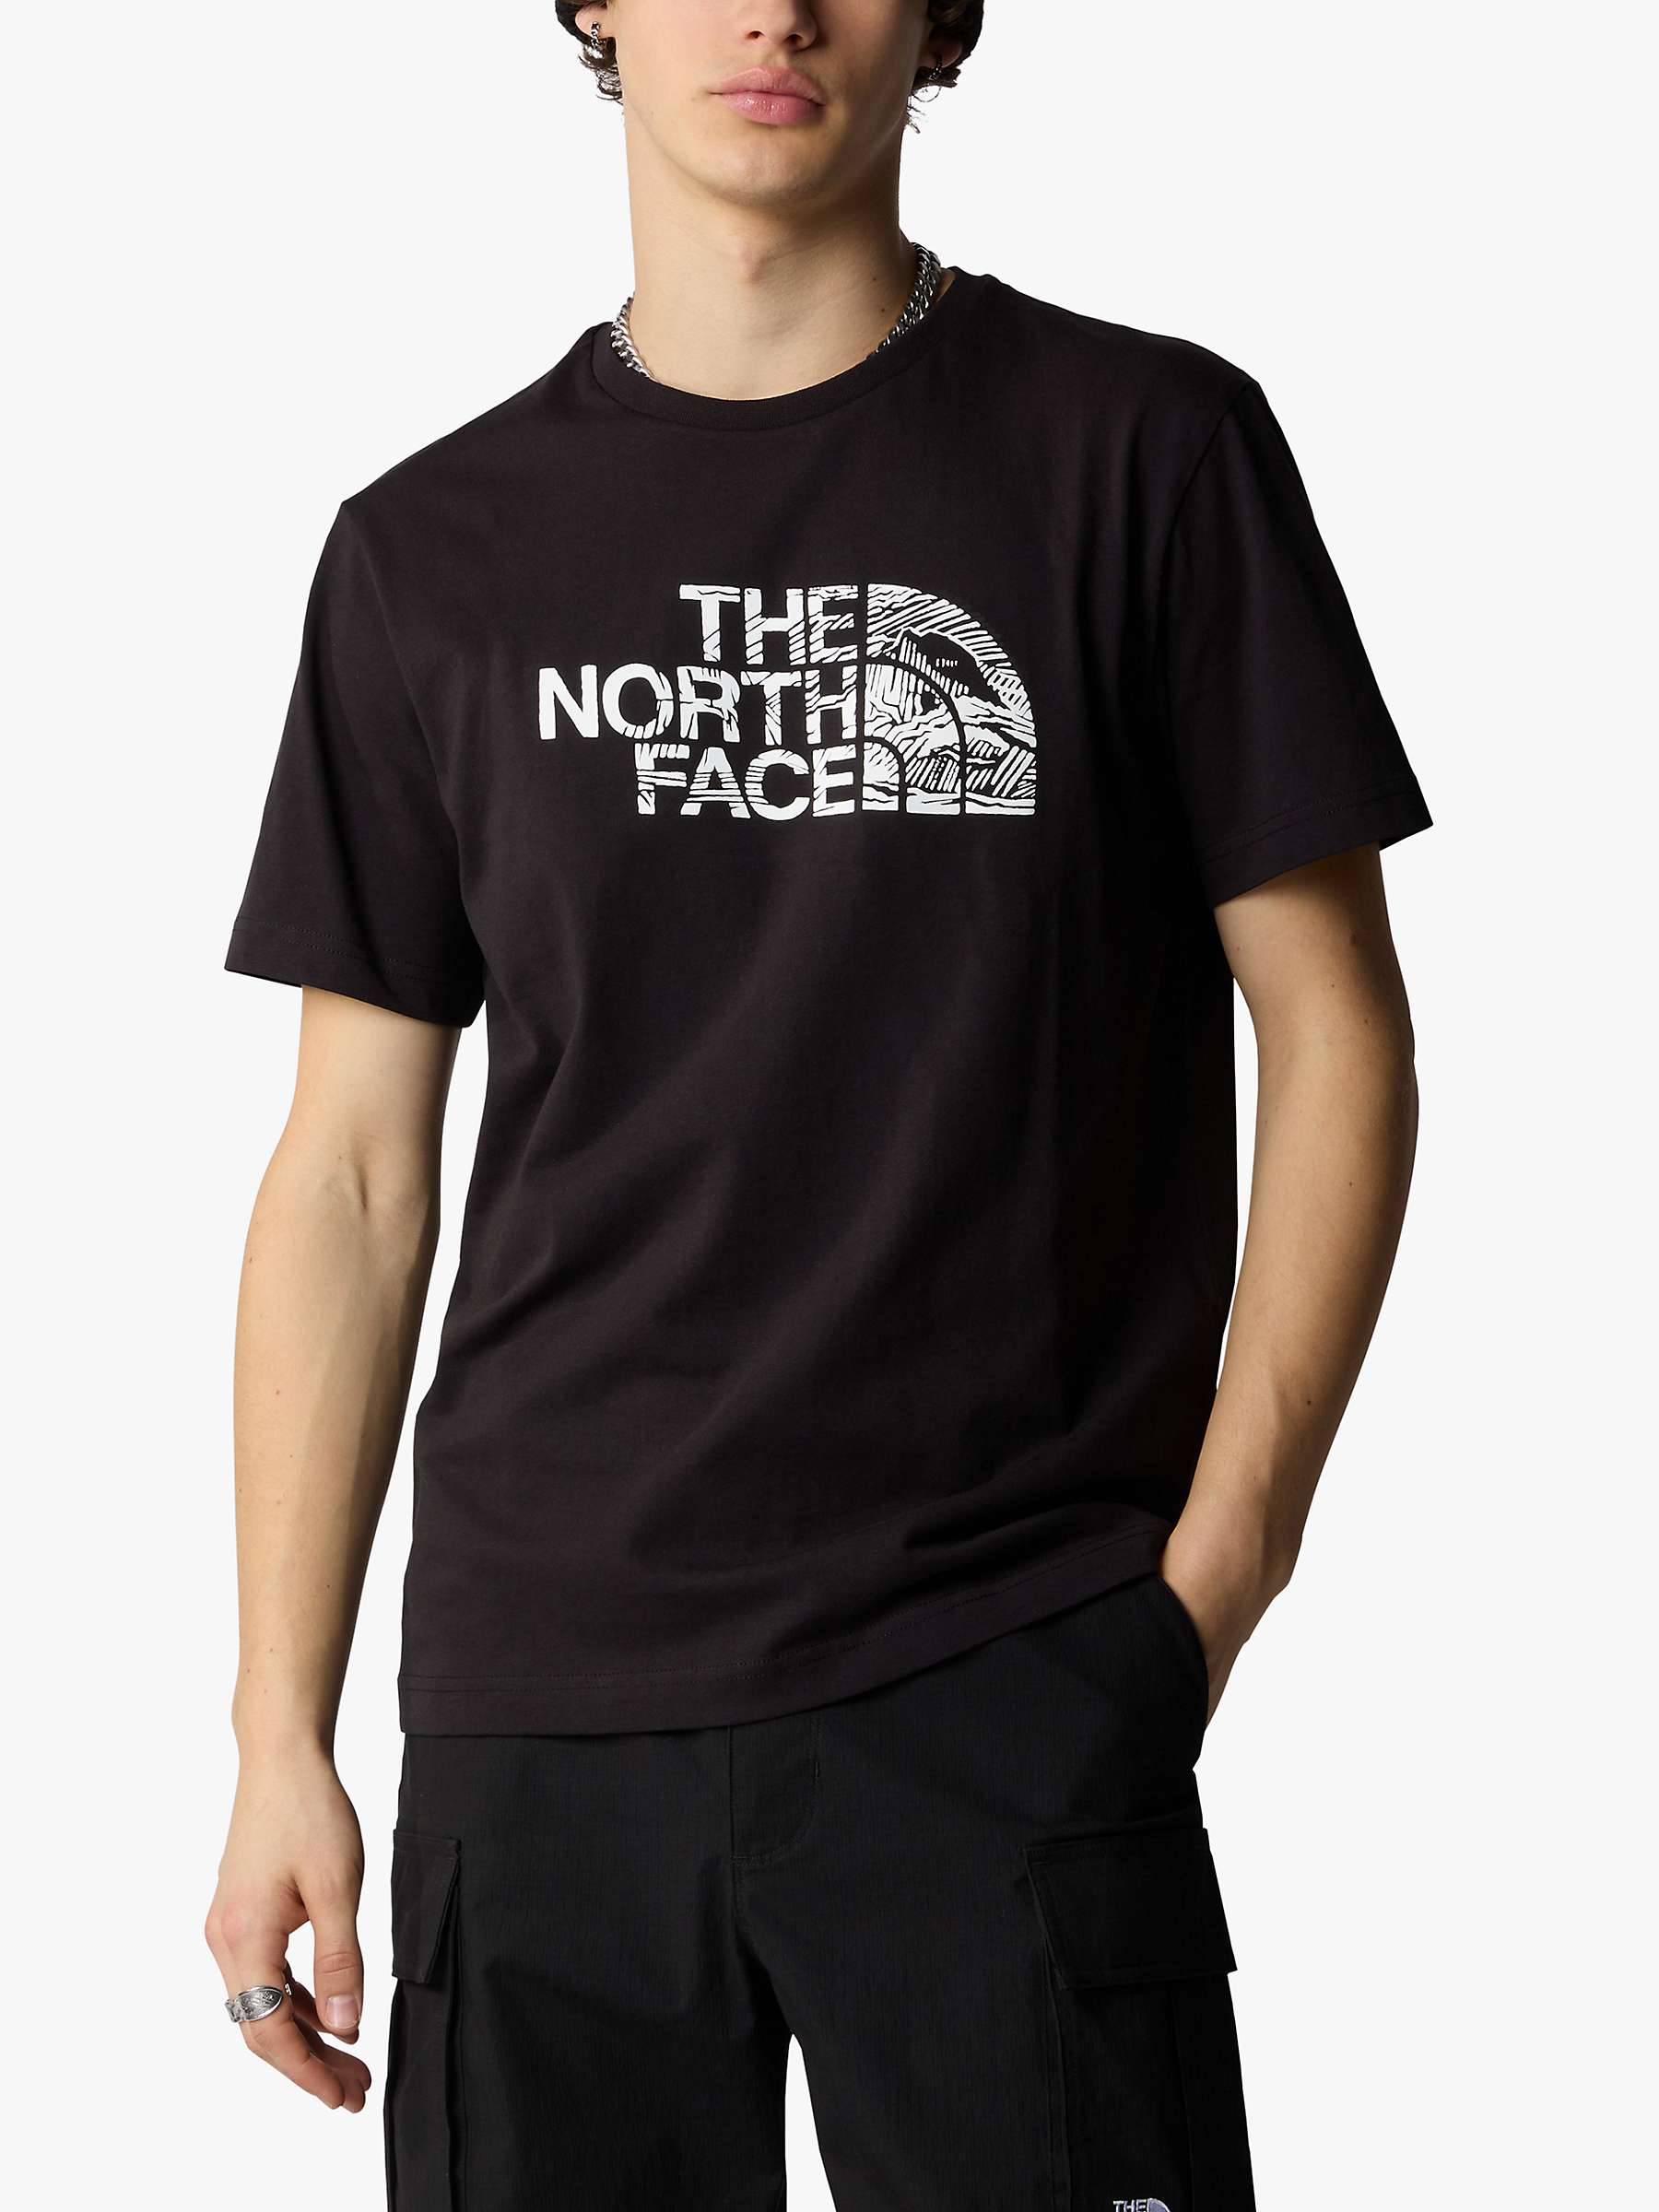 Buy The North Face Short Sleeve Wood Dome T-Shirt, Black Online at johnlewis.com